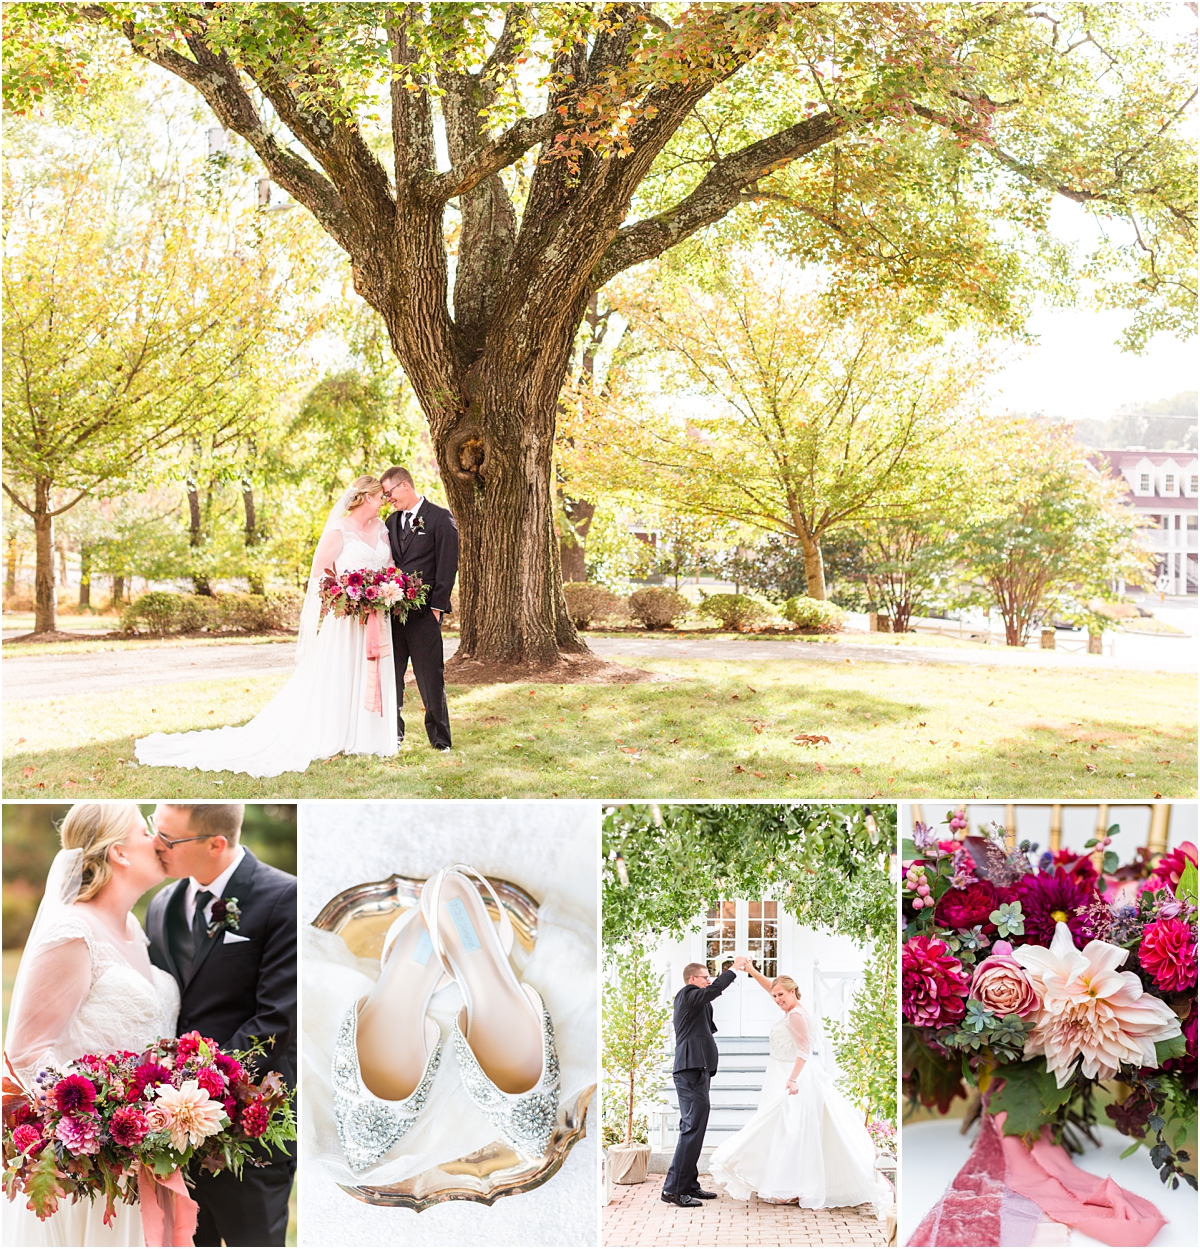 Waverly Mansion Wedding photographed by MD wedding photographer Alexandra Mandato Photography